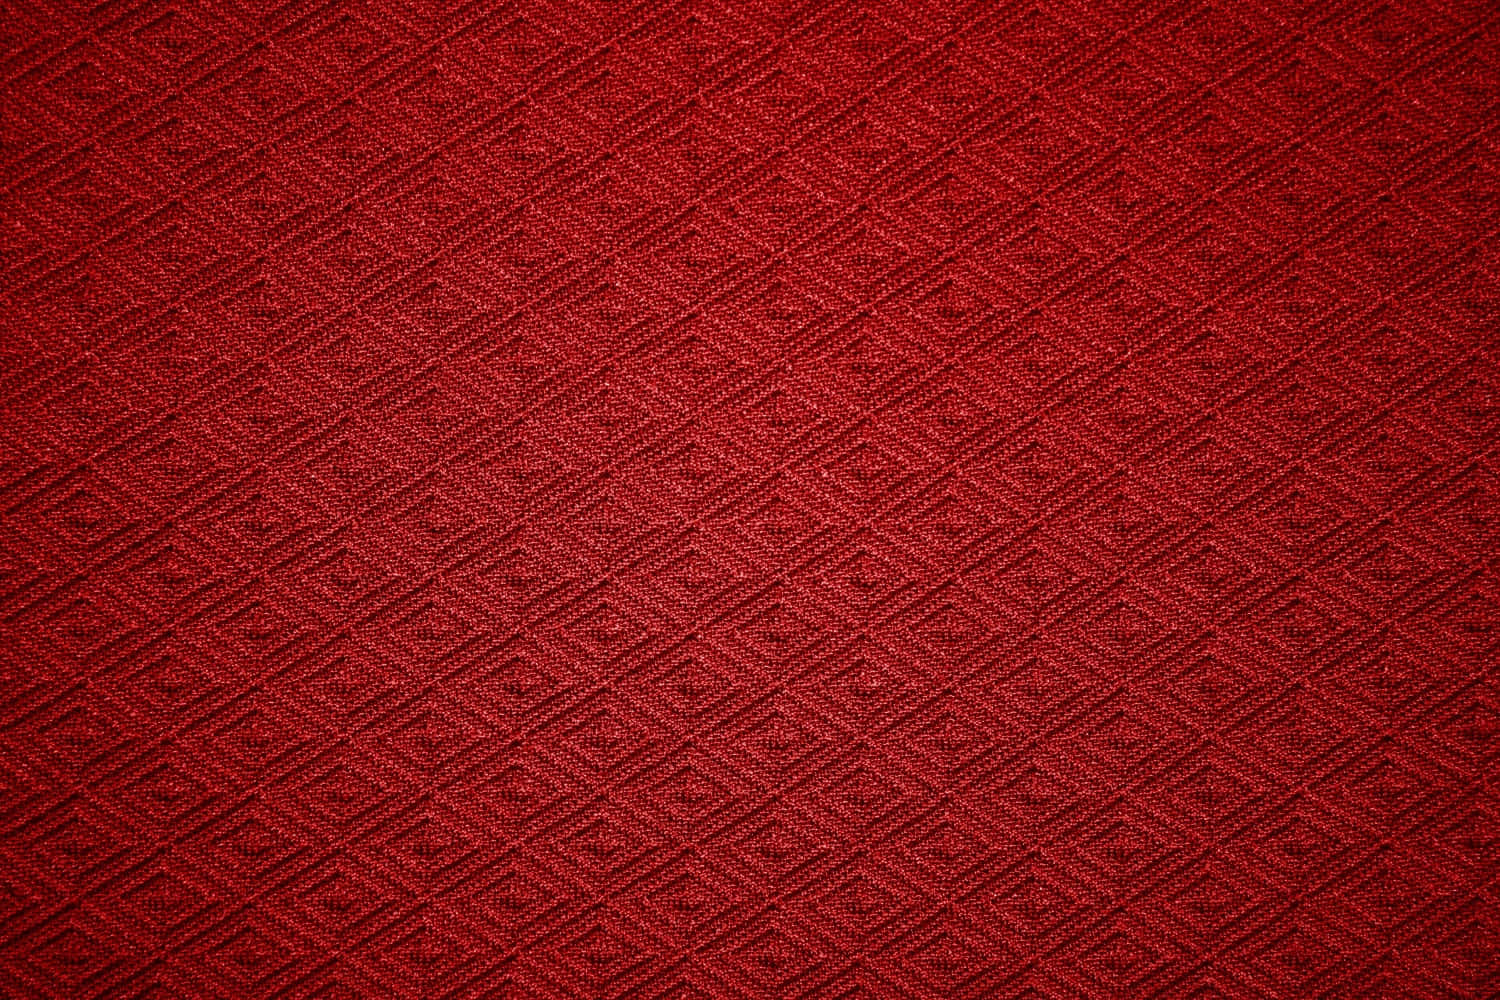 Fabric Texture Pictures Red Diamond